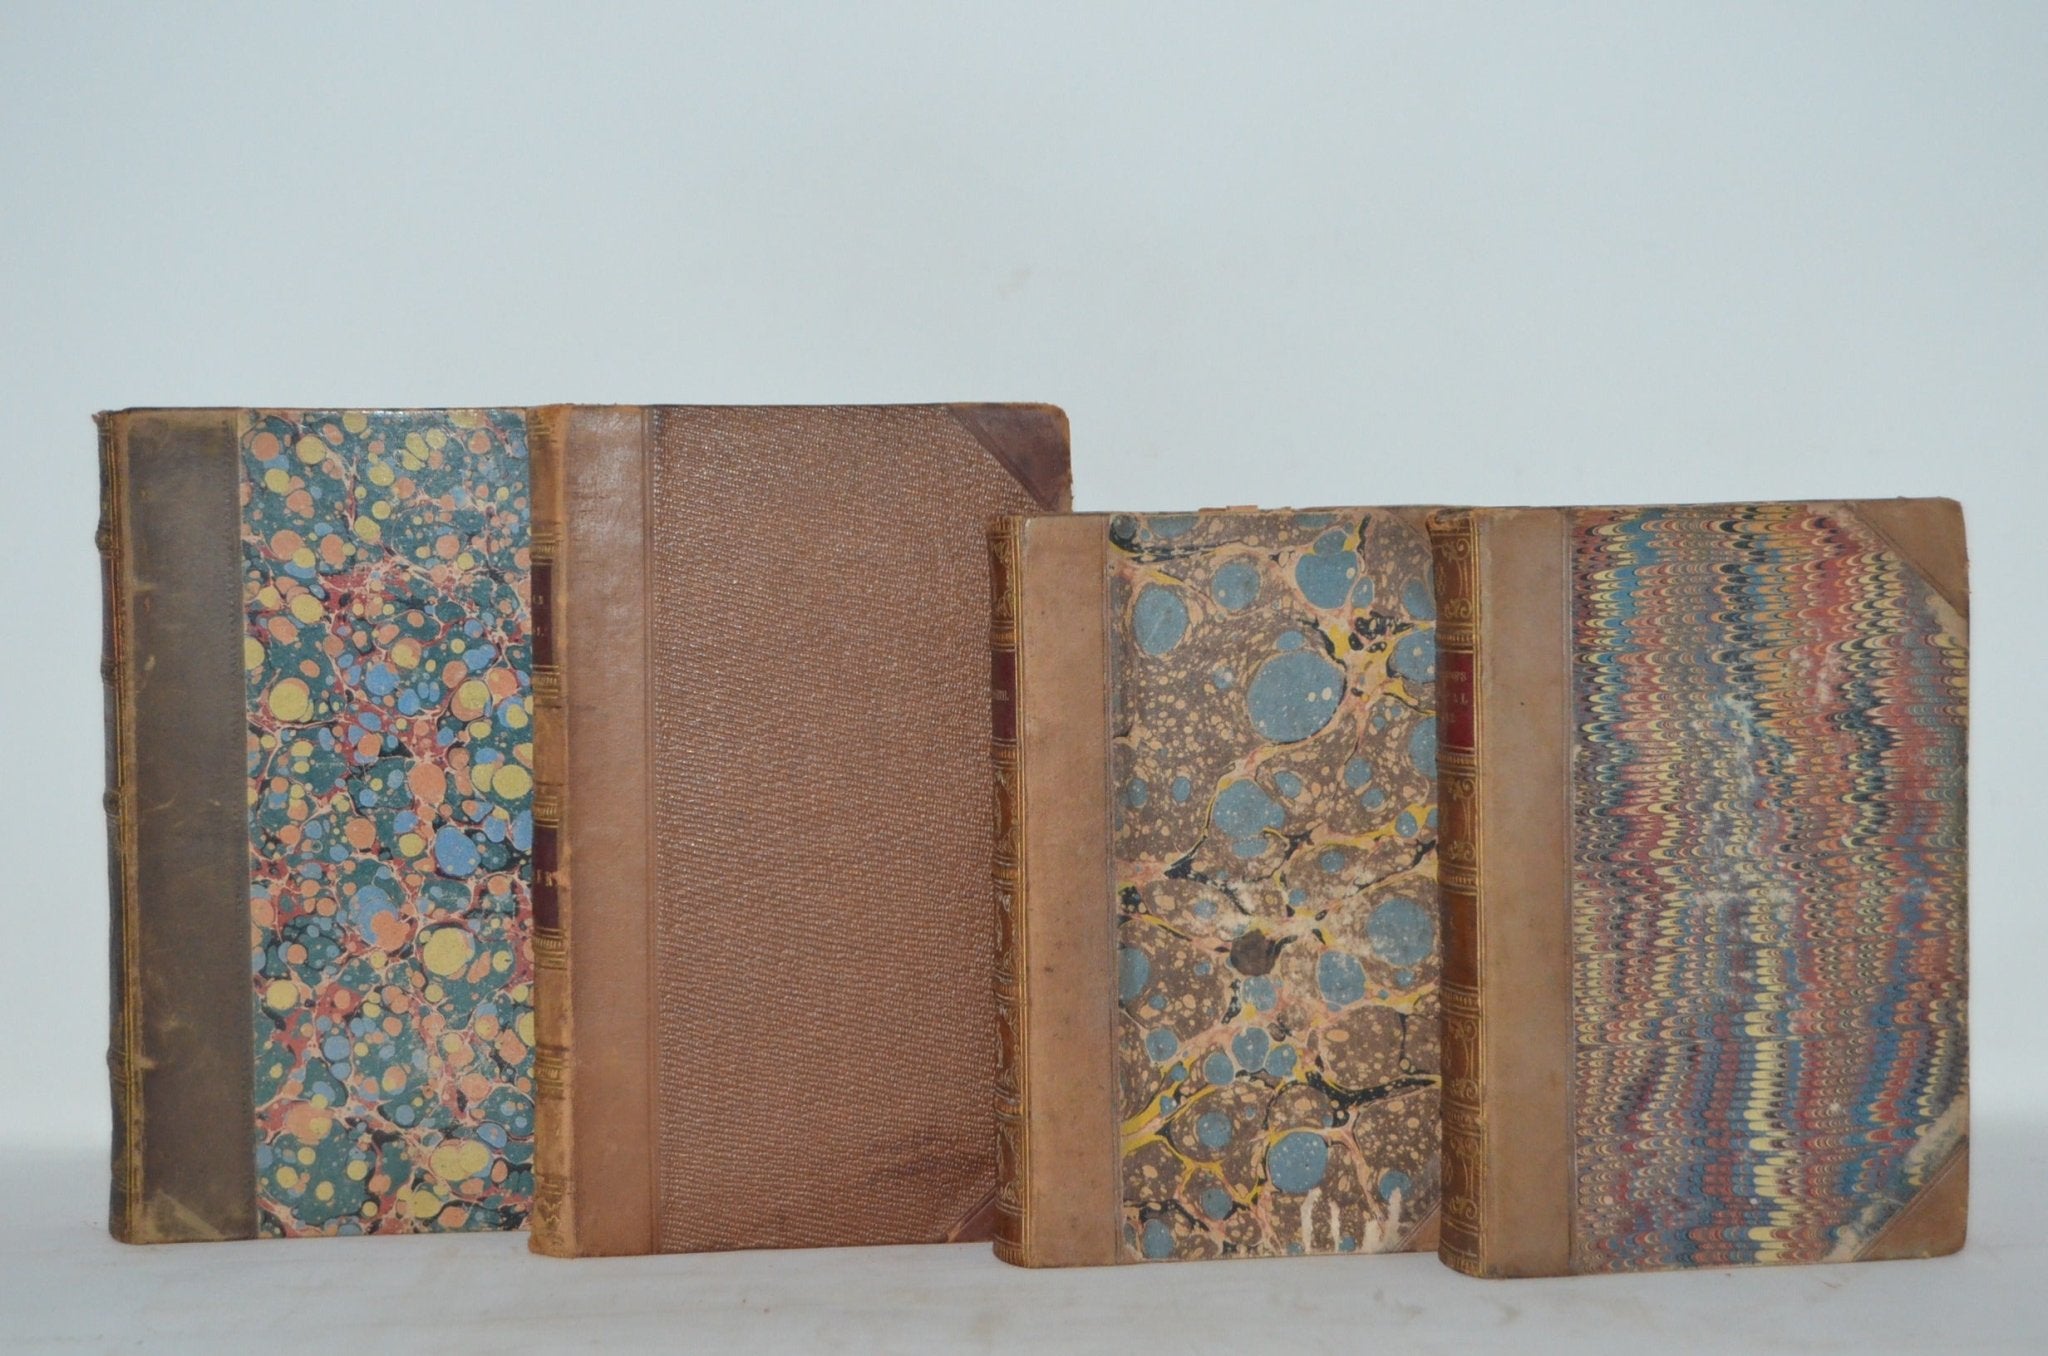 Antique Leather Bound Book Décor – 9” Shades of Brown, Maroon & Gold - Brookfield Books